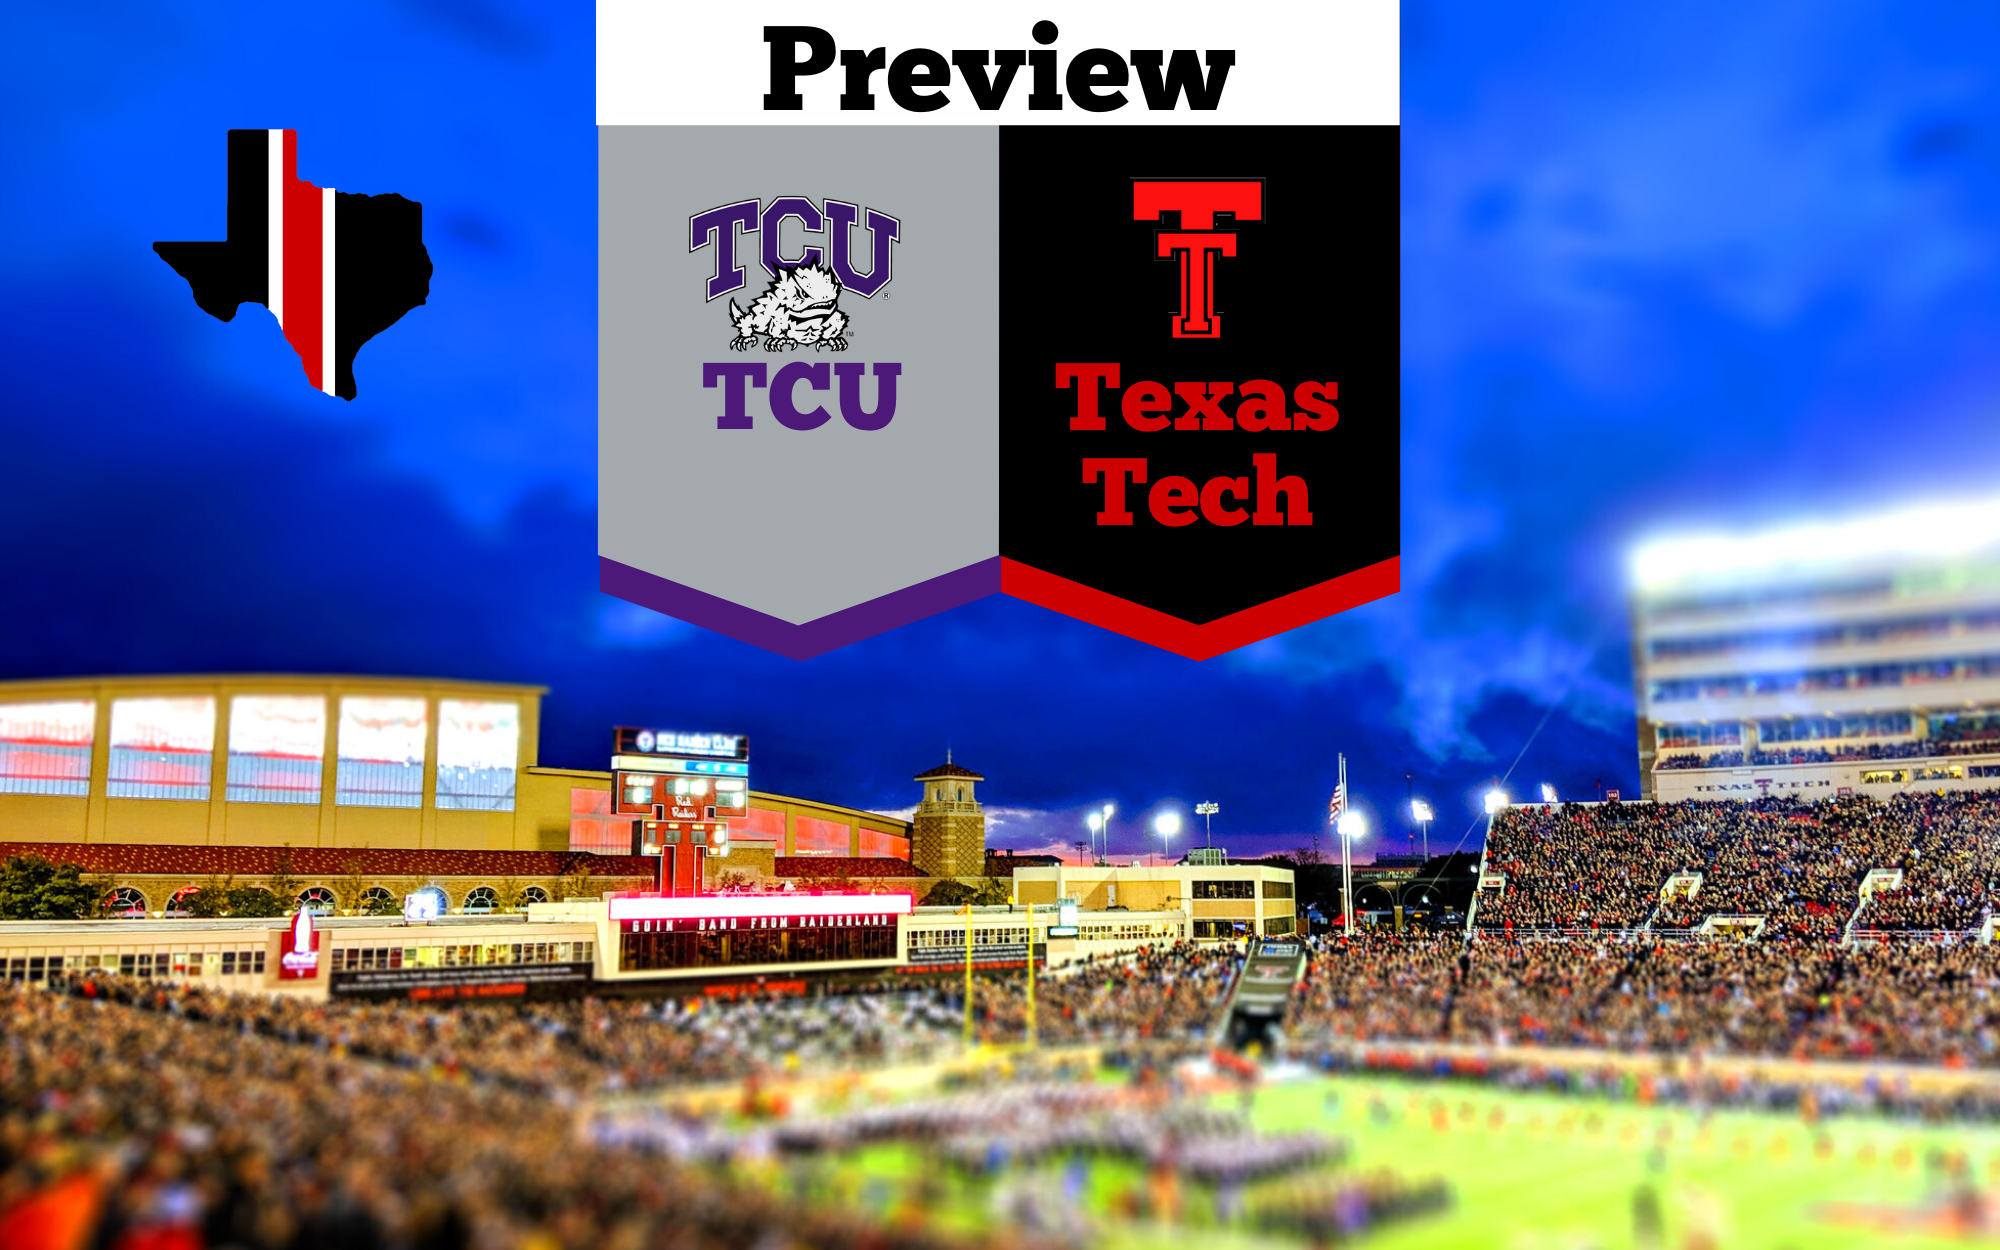 Preview: TCU Horned Frogs vs. Texas Tech Red Raiders